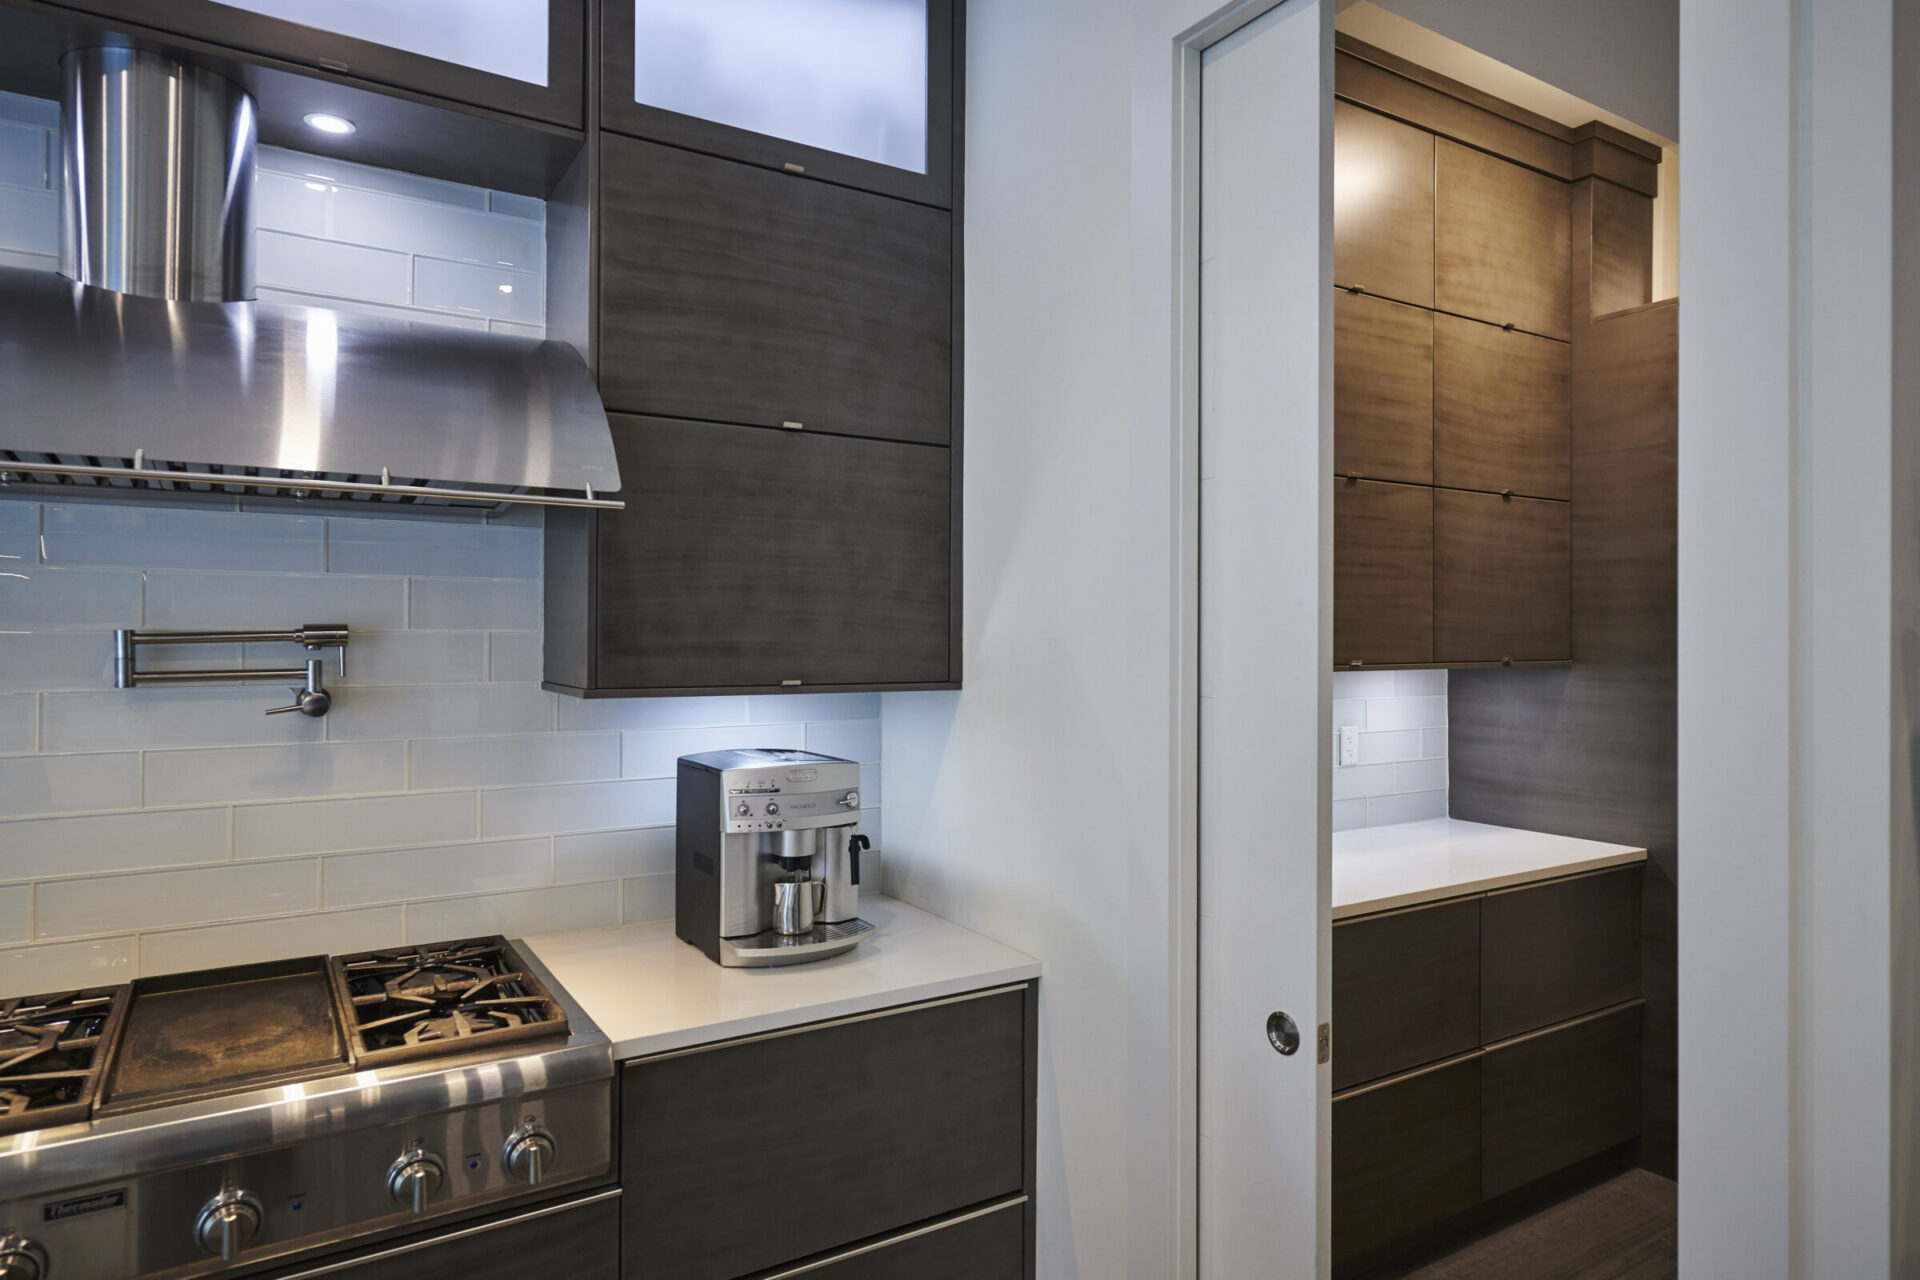 Modern kitchen with stainless steel gas stove, range hood, espresso machine, blue backsplash tiles, and dark wood cabinets opening to a small hallway.